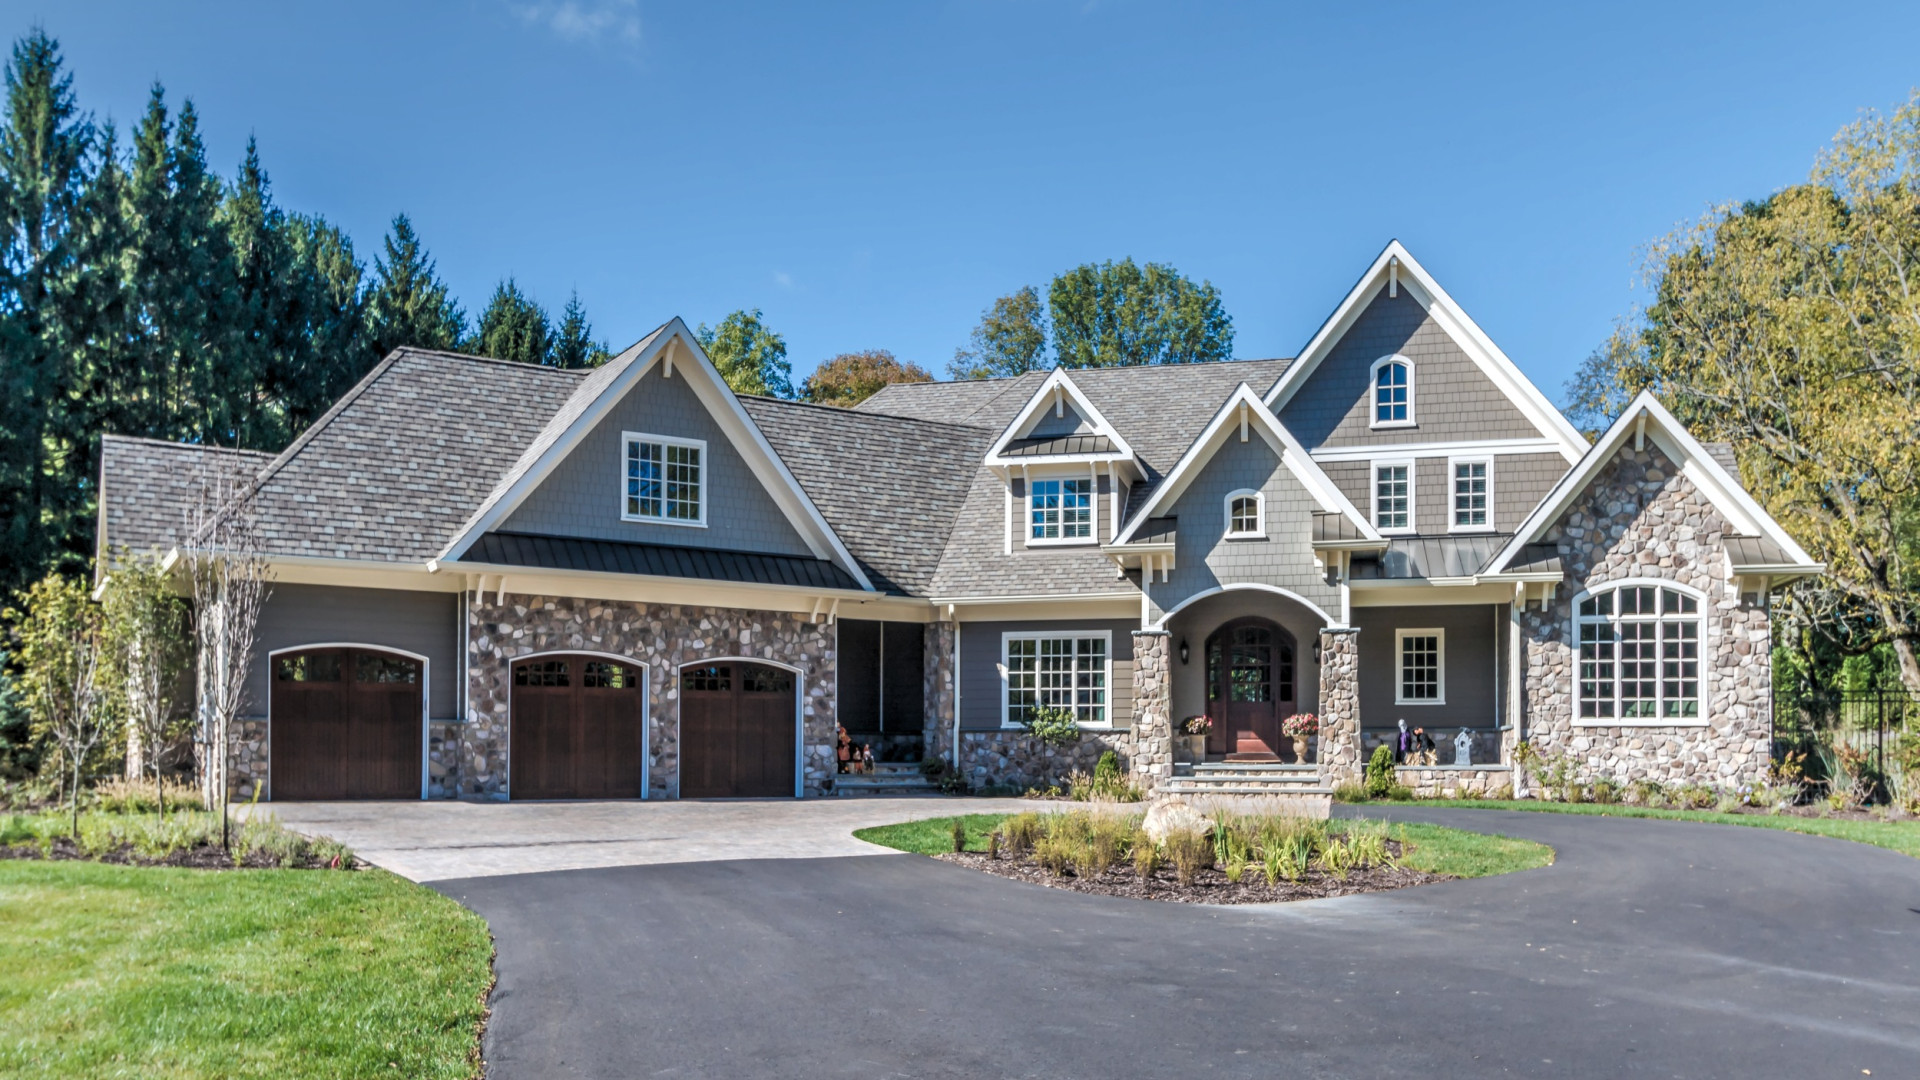 Luxury New Jersey home with a beautiful stone exterior, New Jersey